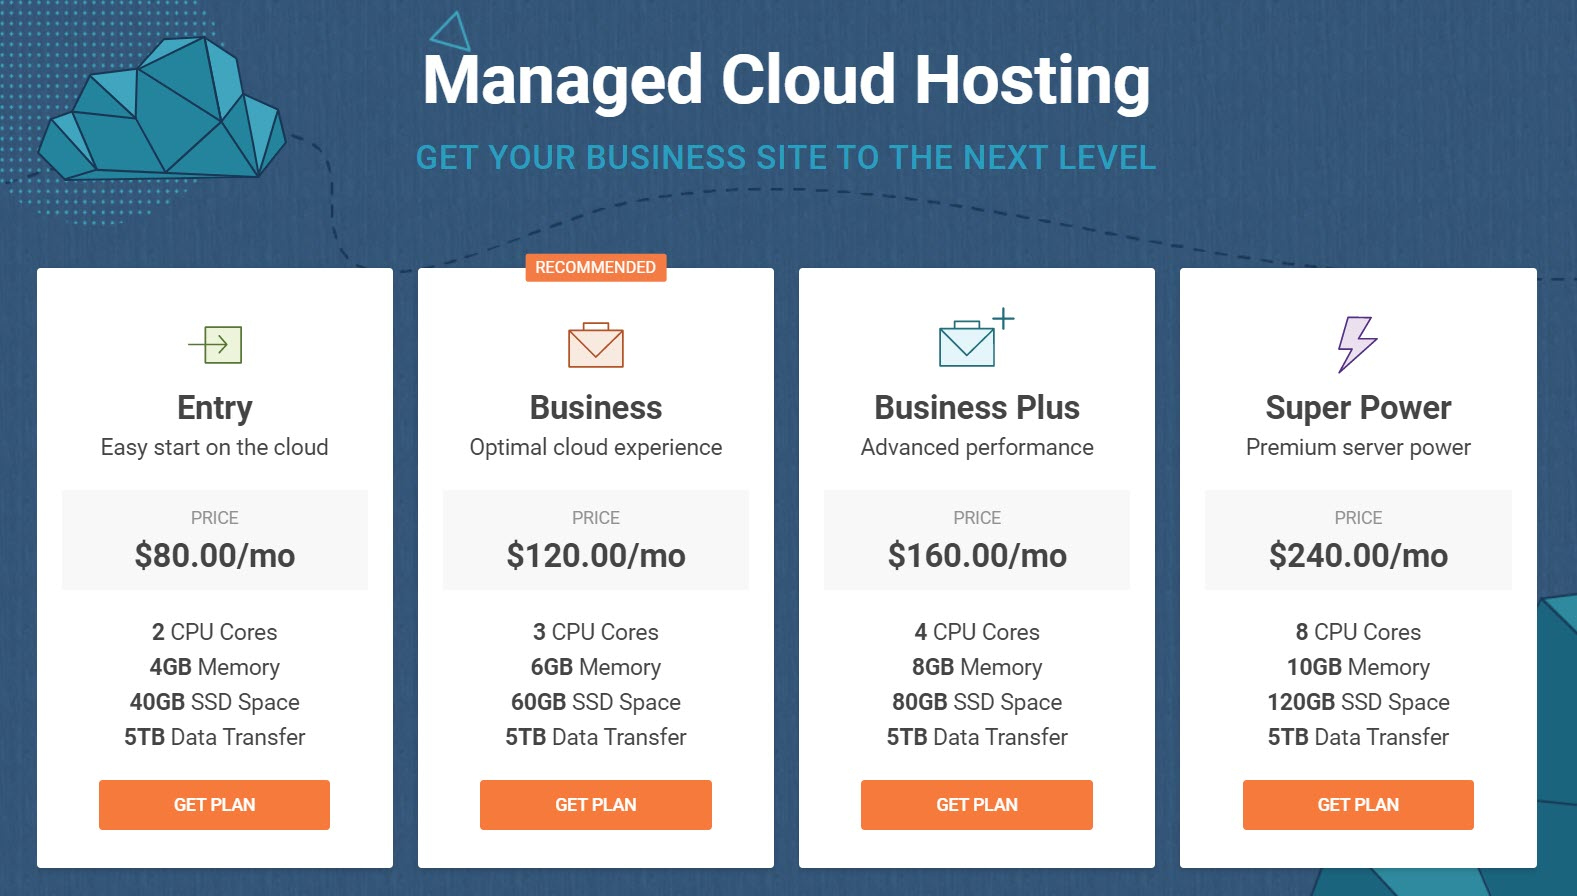 6 Best Month To Month Web Hosting As Low As 2 88 Month Images, Photos, Reviews